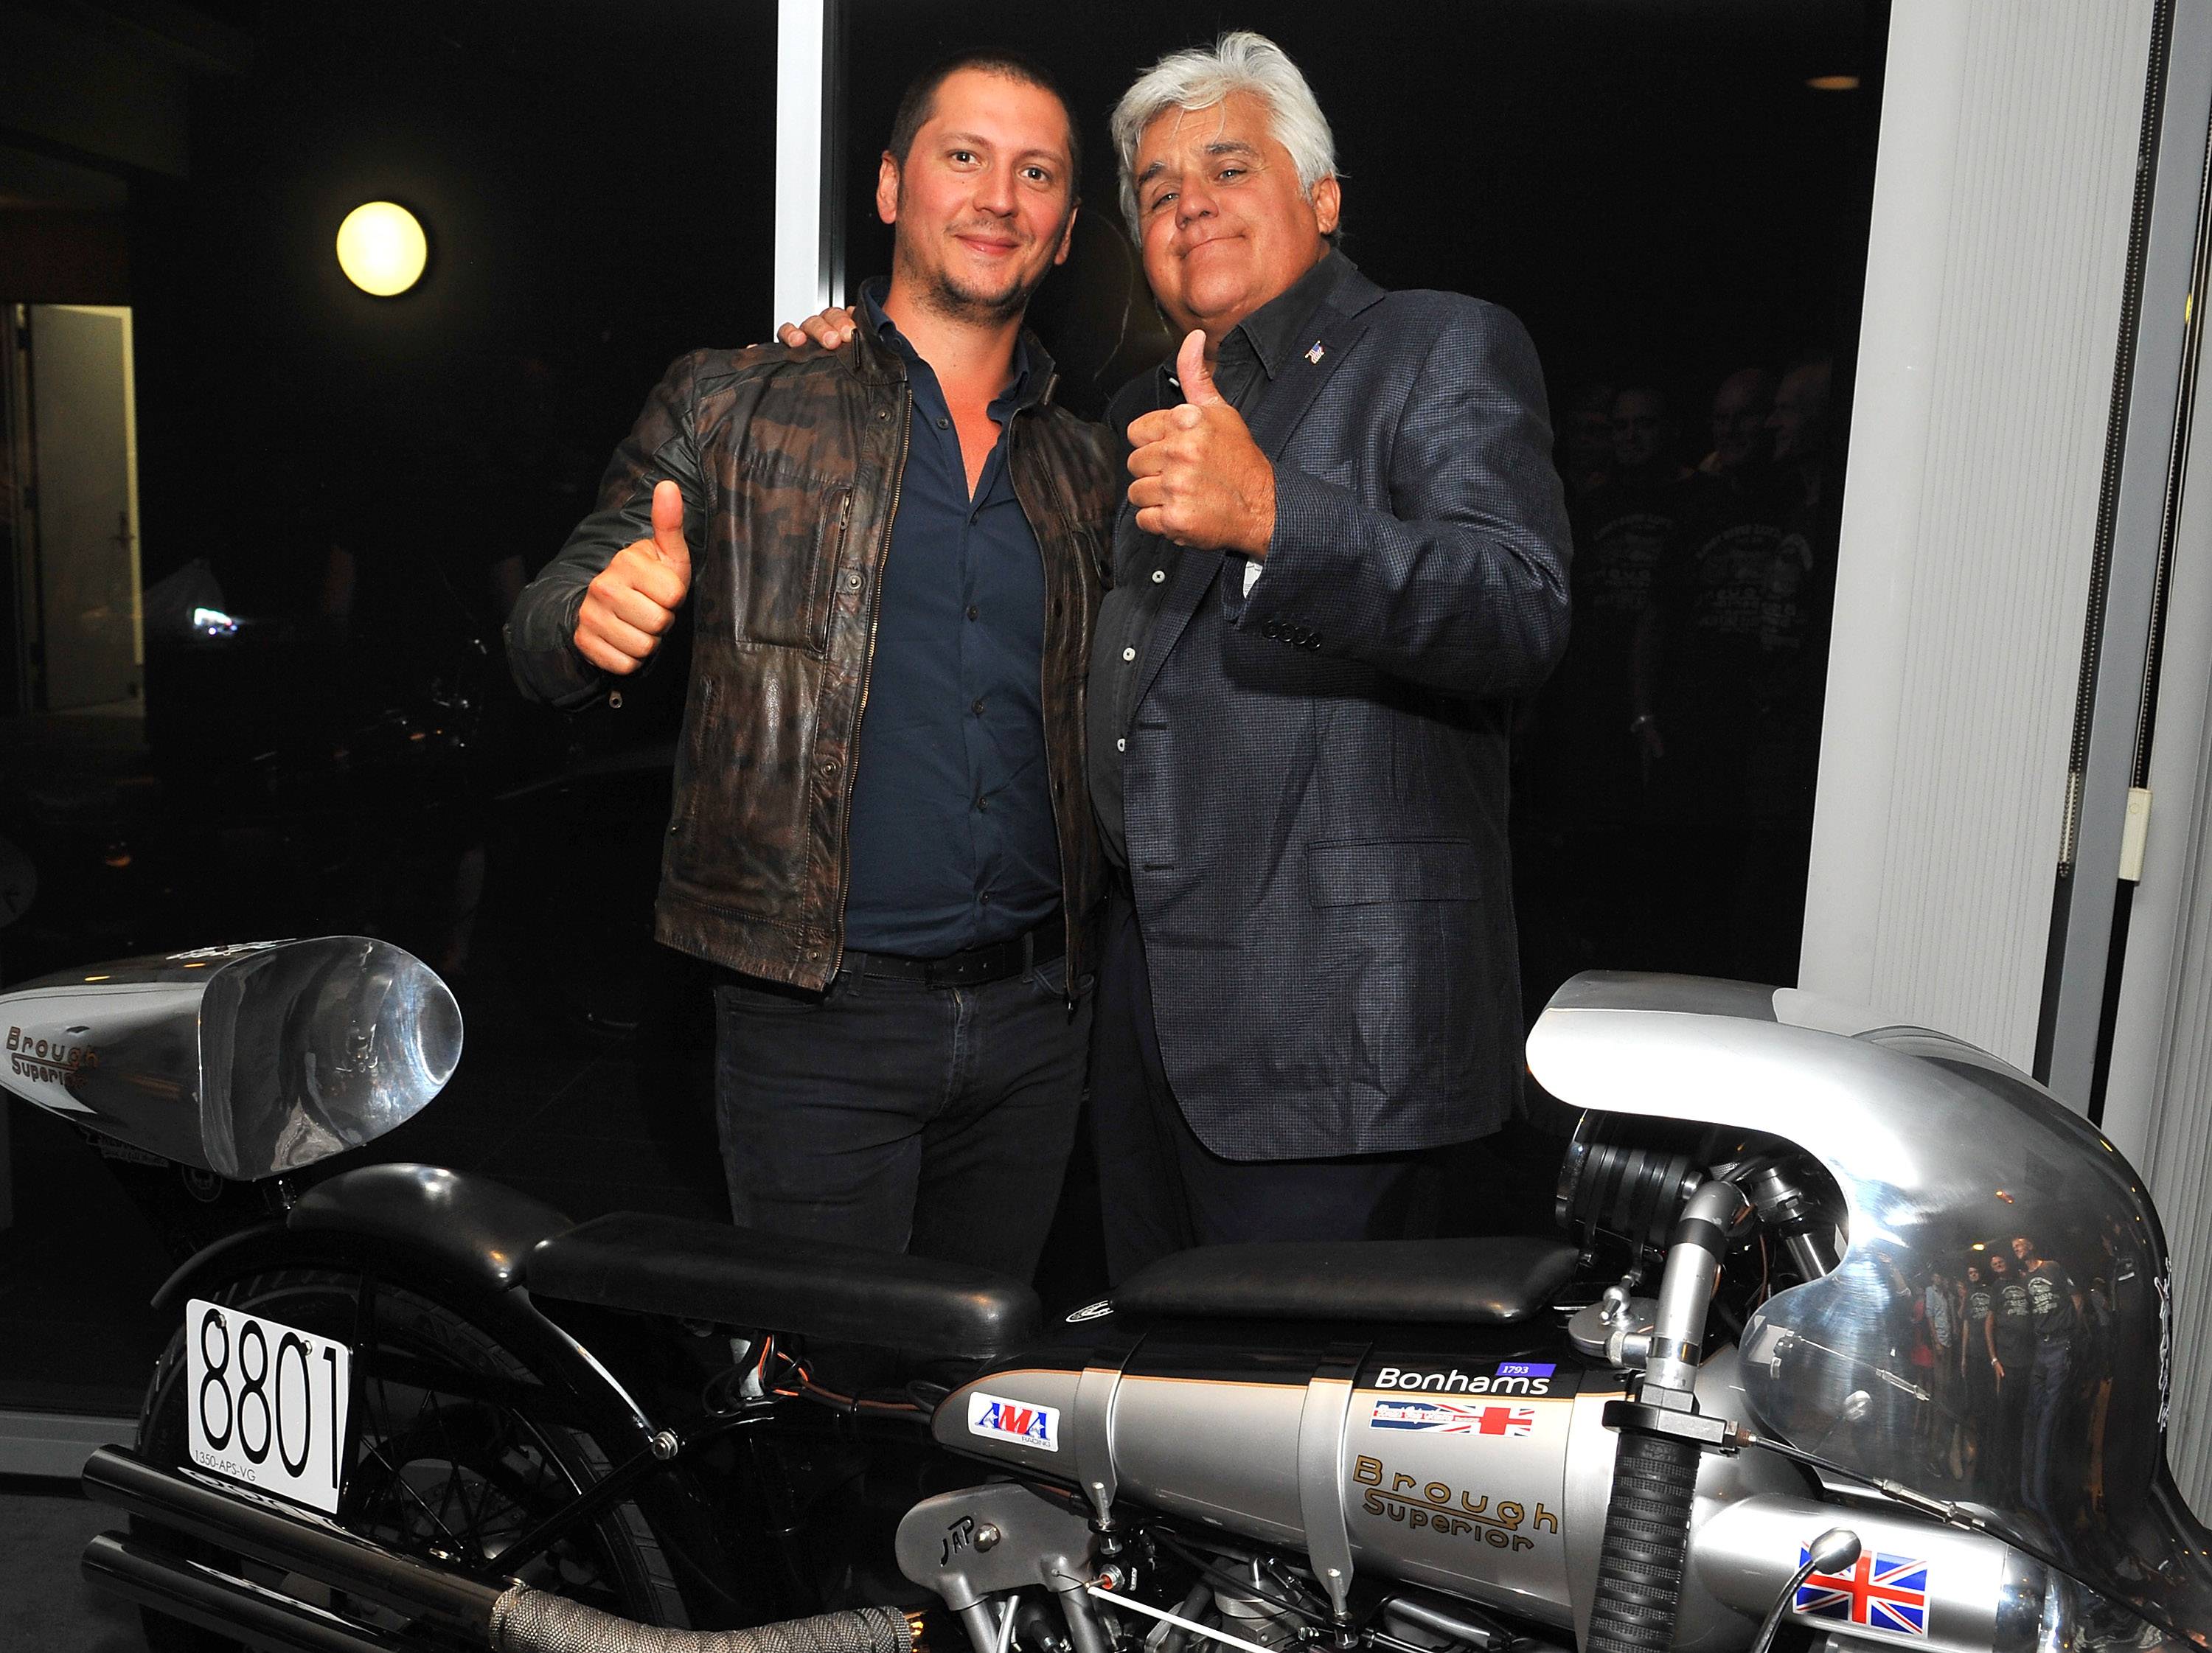 Matchless and Ace Cafe Presents Return To The Salt with Brough Superior Hosted by Jay Leno